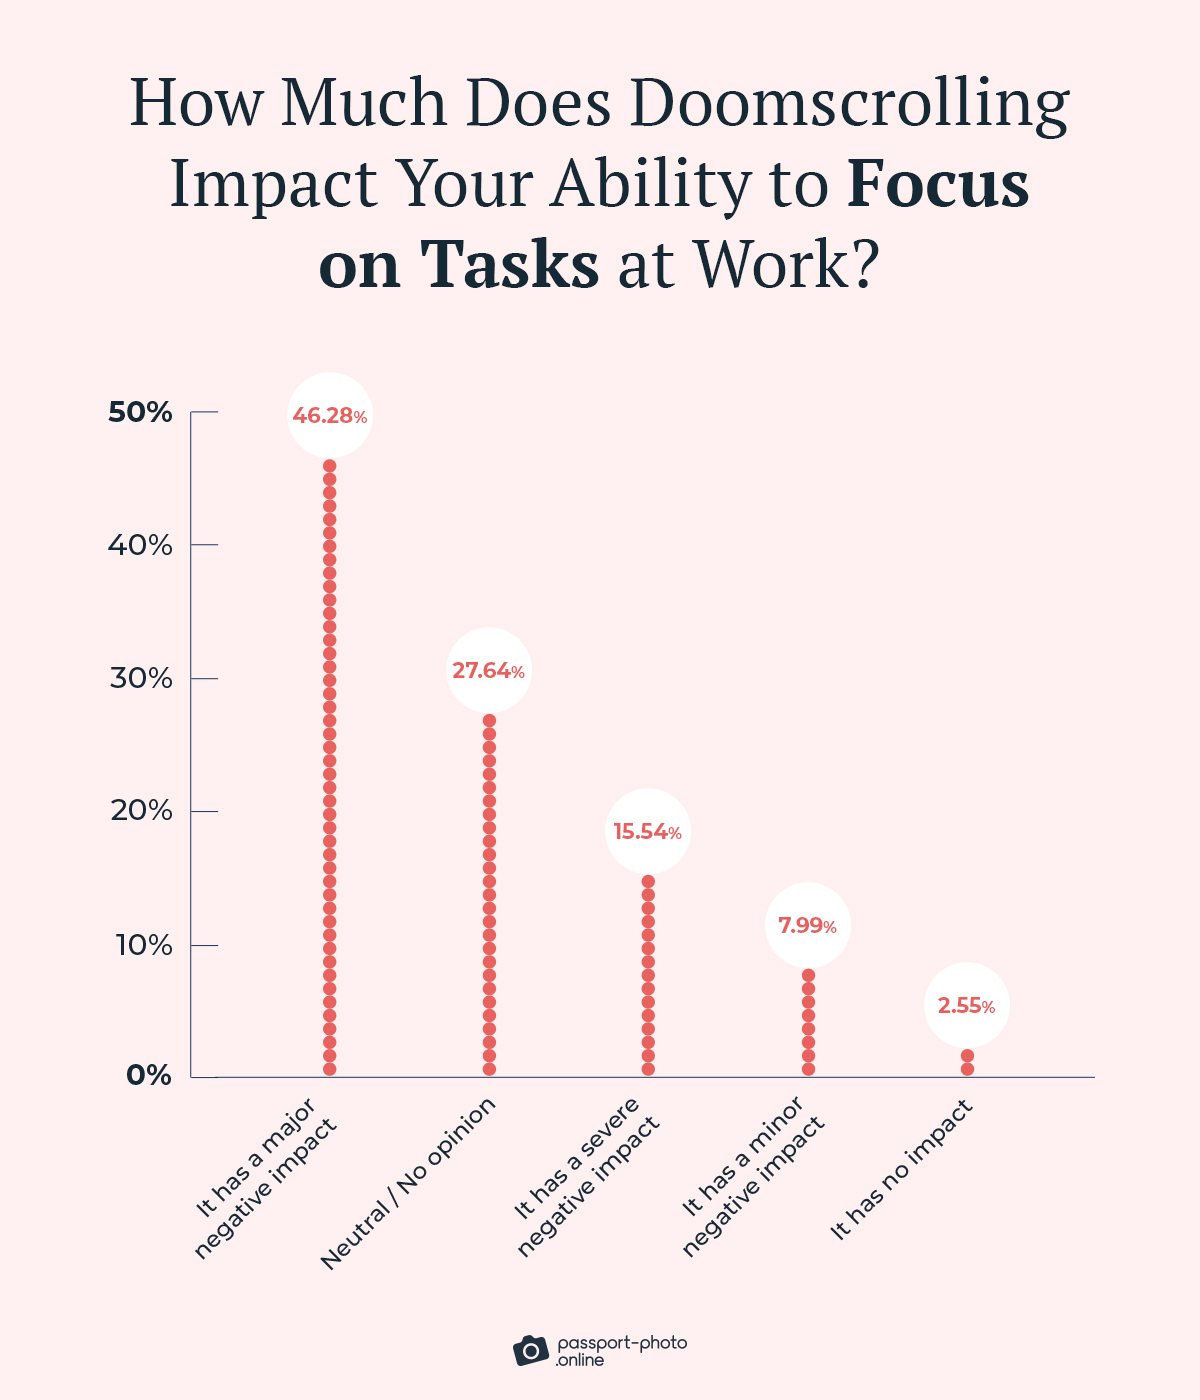 62% of workers report doomscrolling hinders their ability to focus on tasks